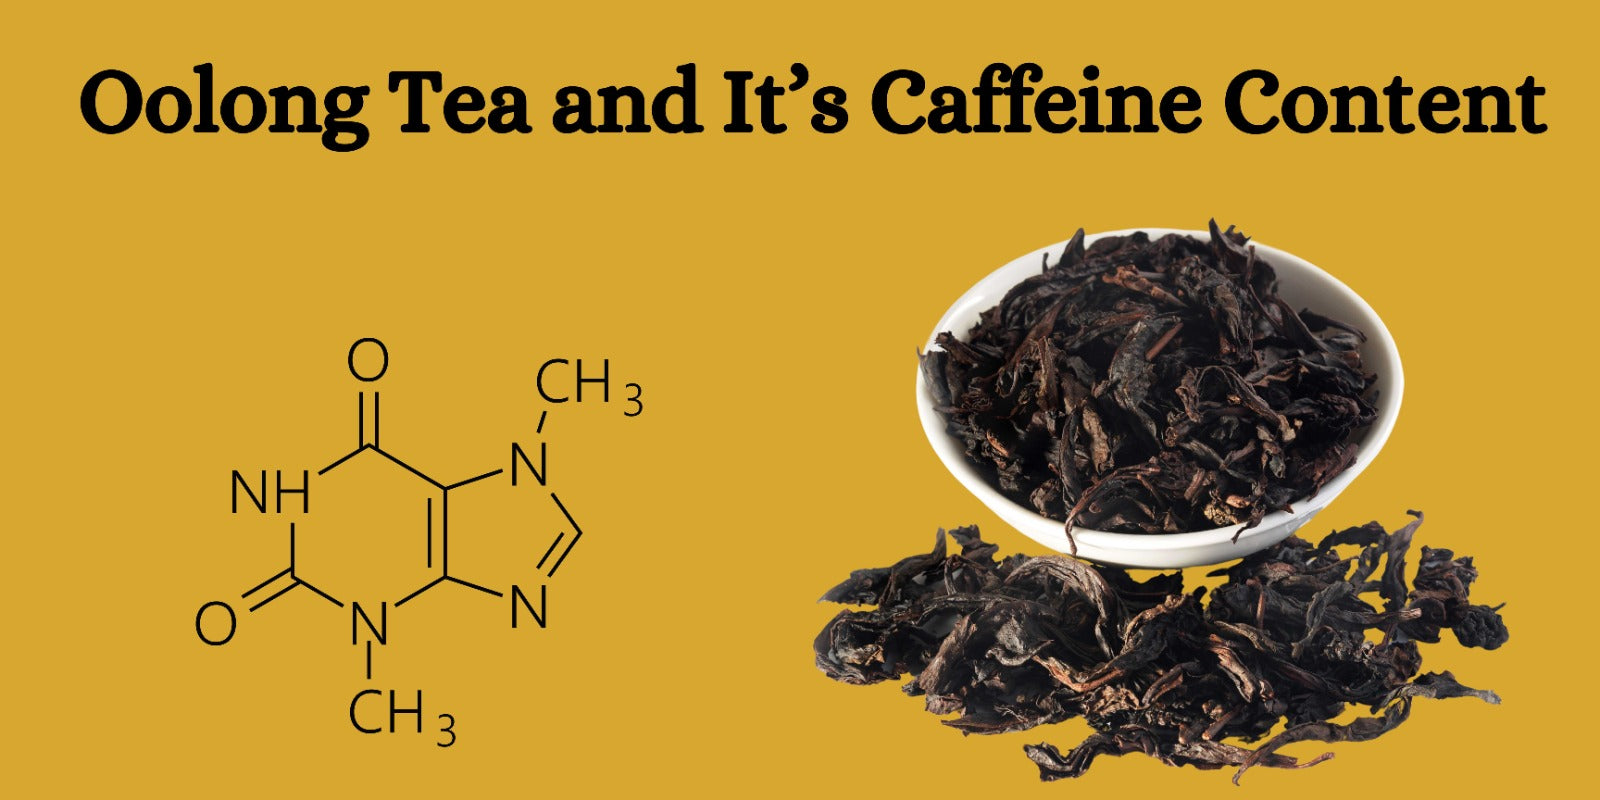 Oolong Tea and It’s Caffeine Content